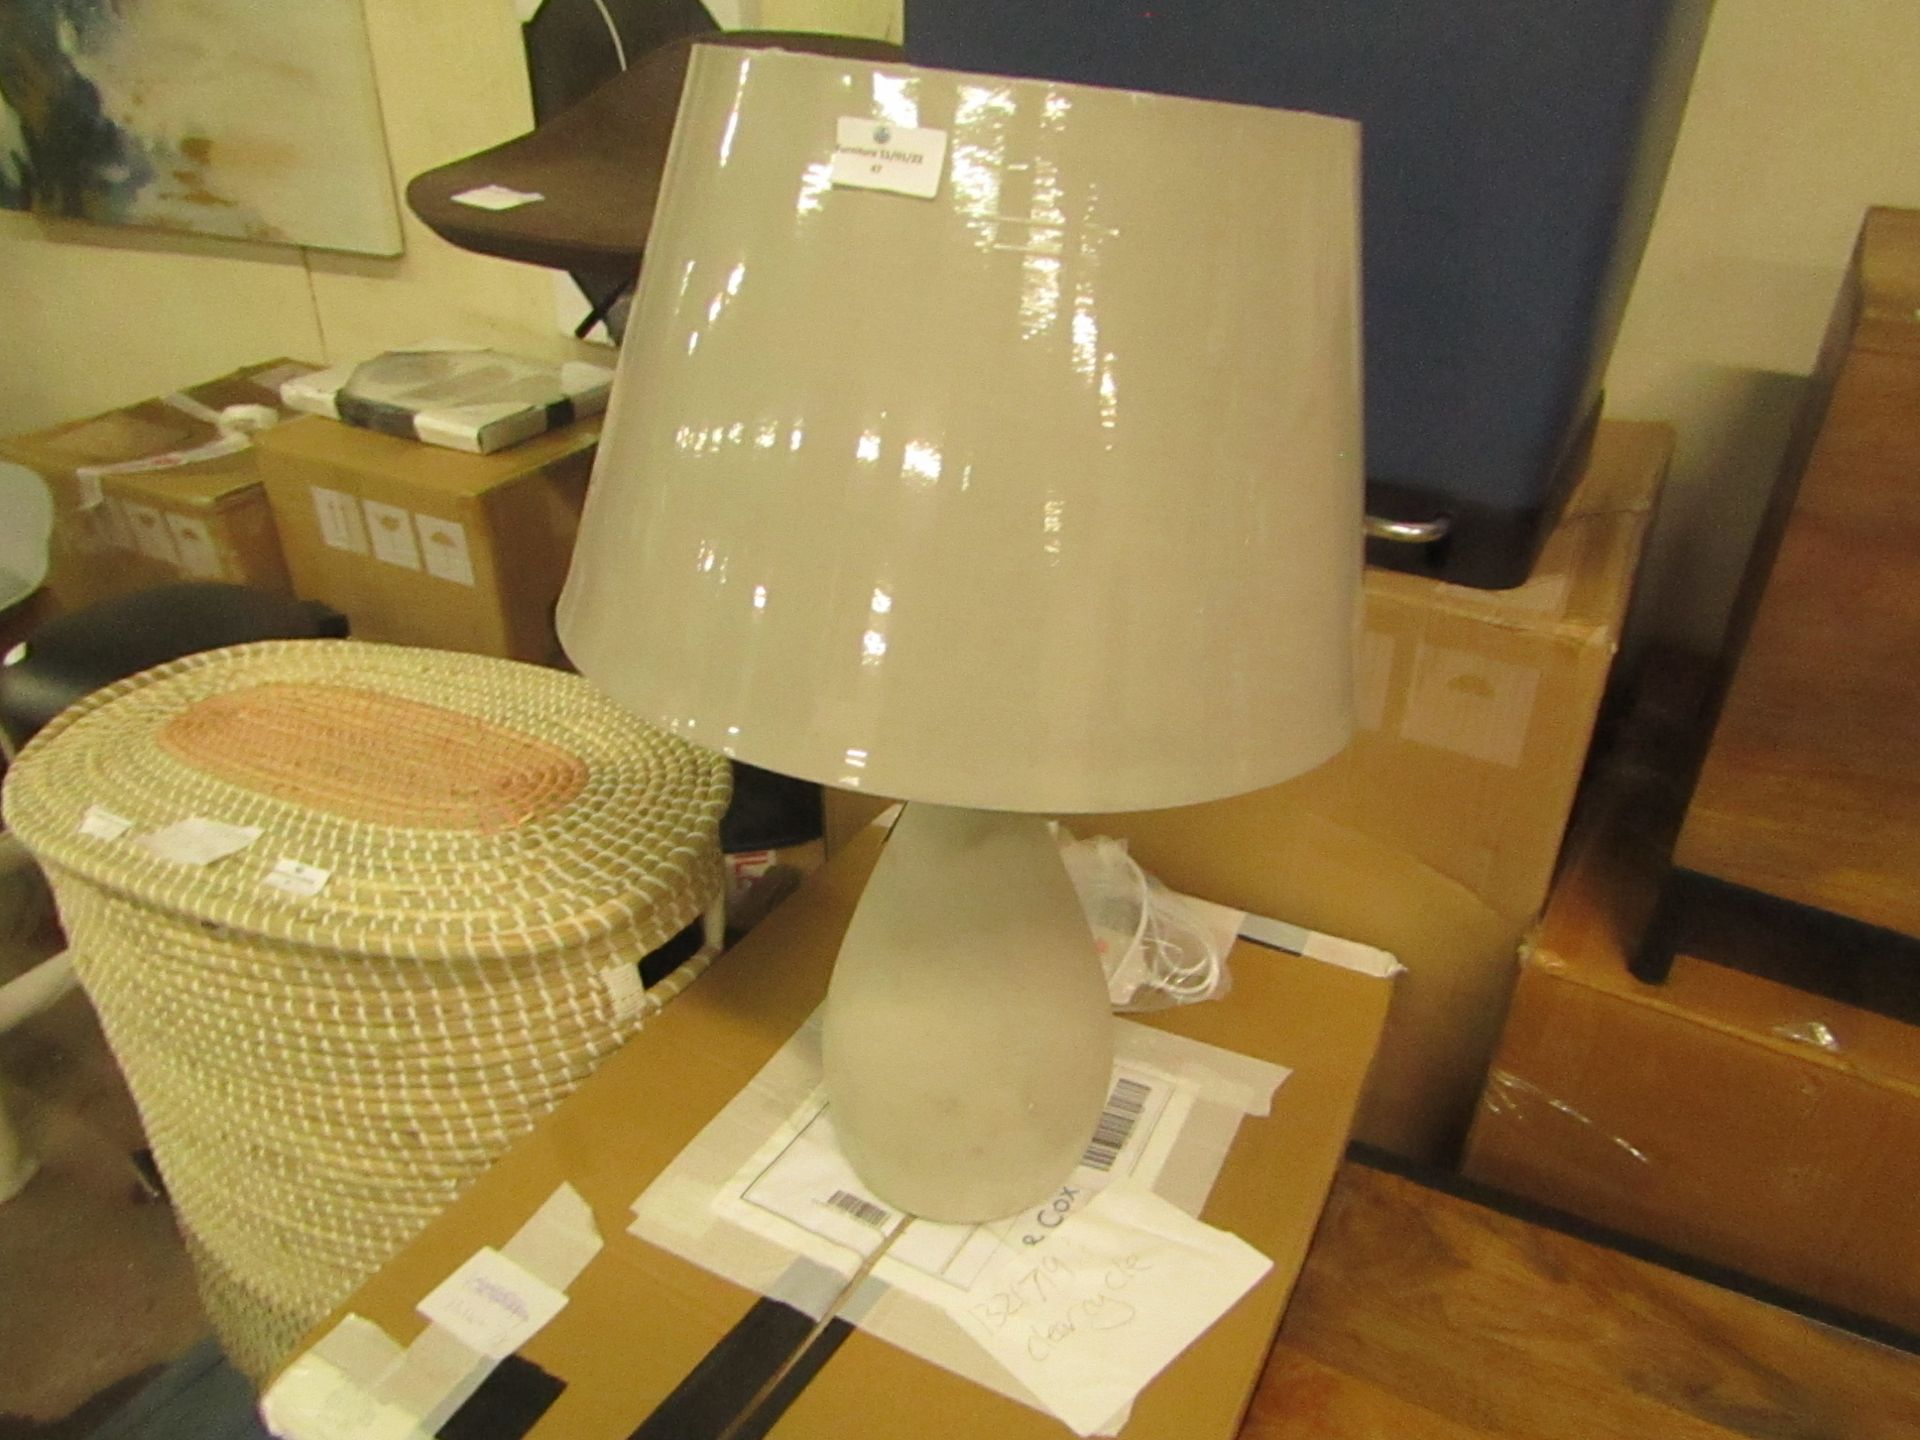 1 x Cox & Cox Concrete Table Lamp RRP £125.00 SKU COX-1321719 TOTAL RRP £125 This lot is a